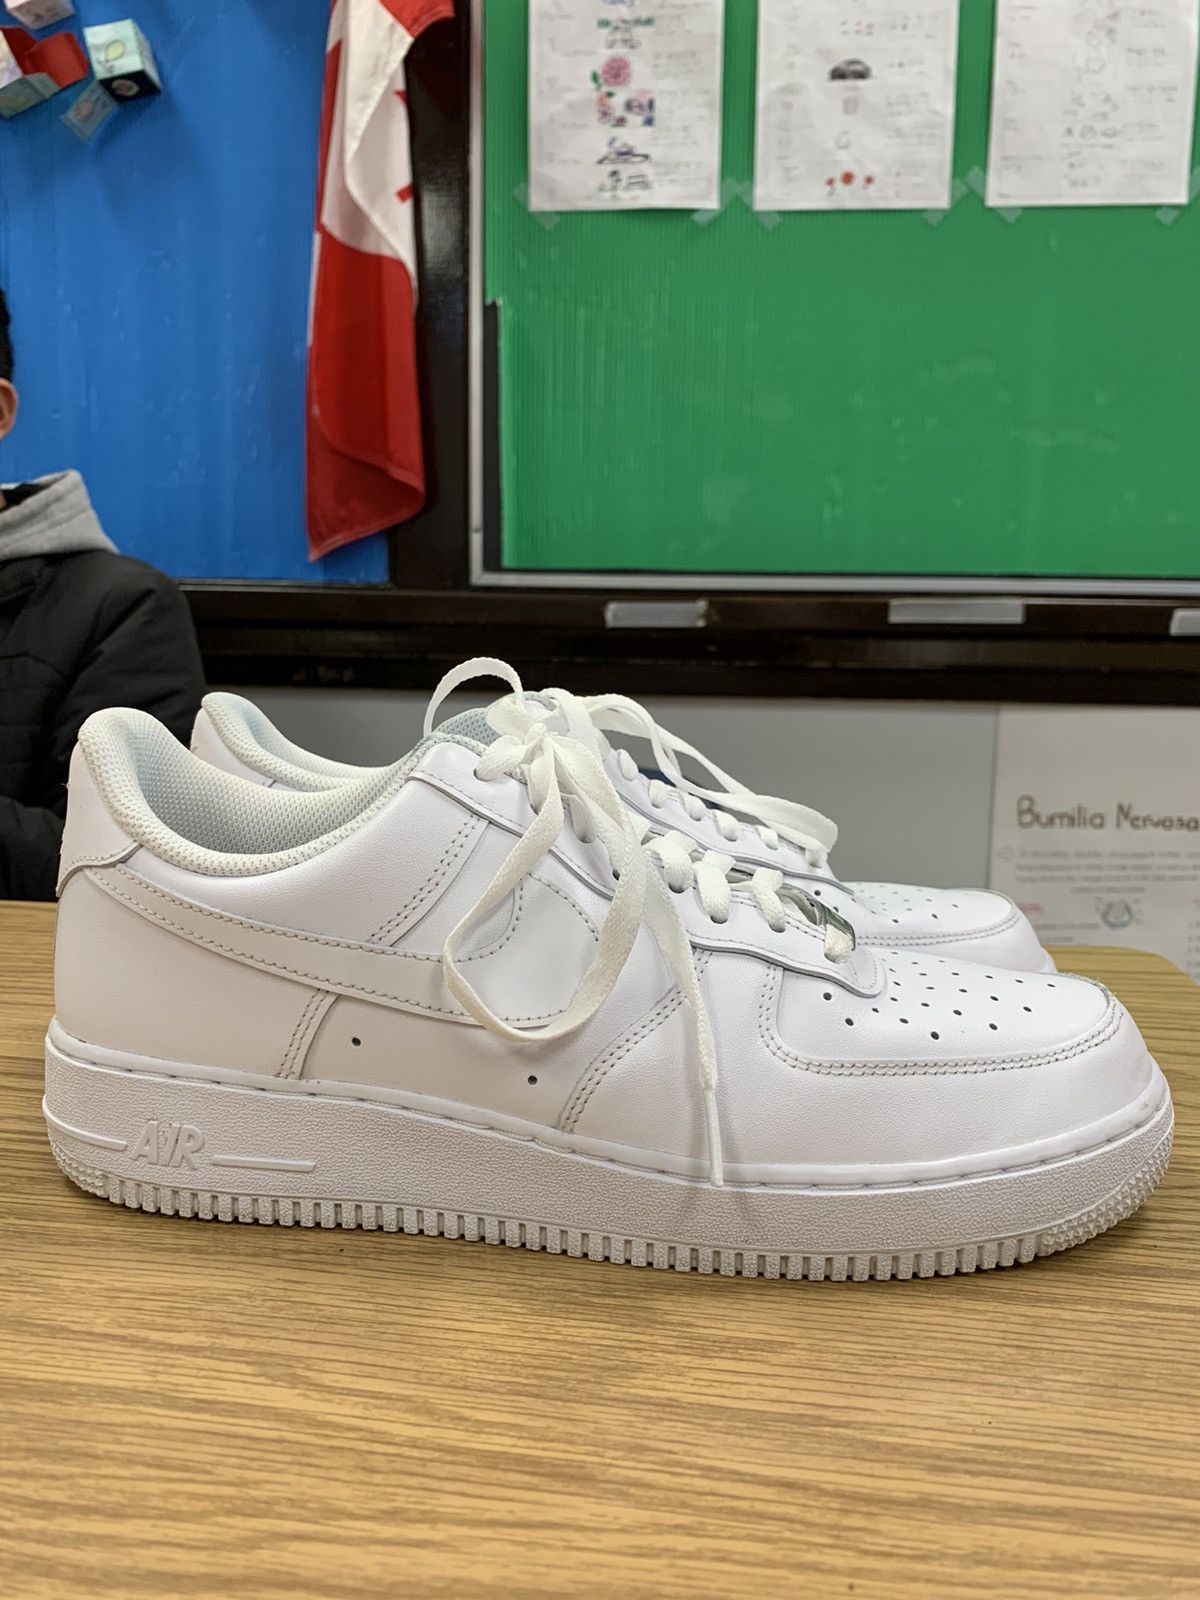 Nike Air Force 1 ‘07 Low White Size US 9.5 / EU 42-43 - 1 Preview